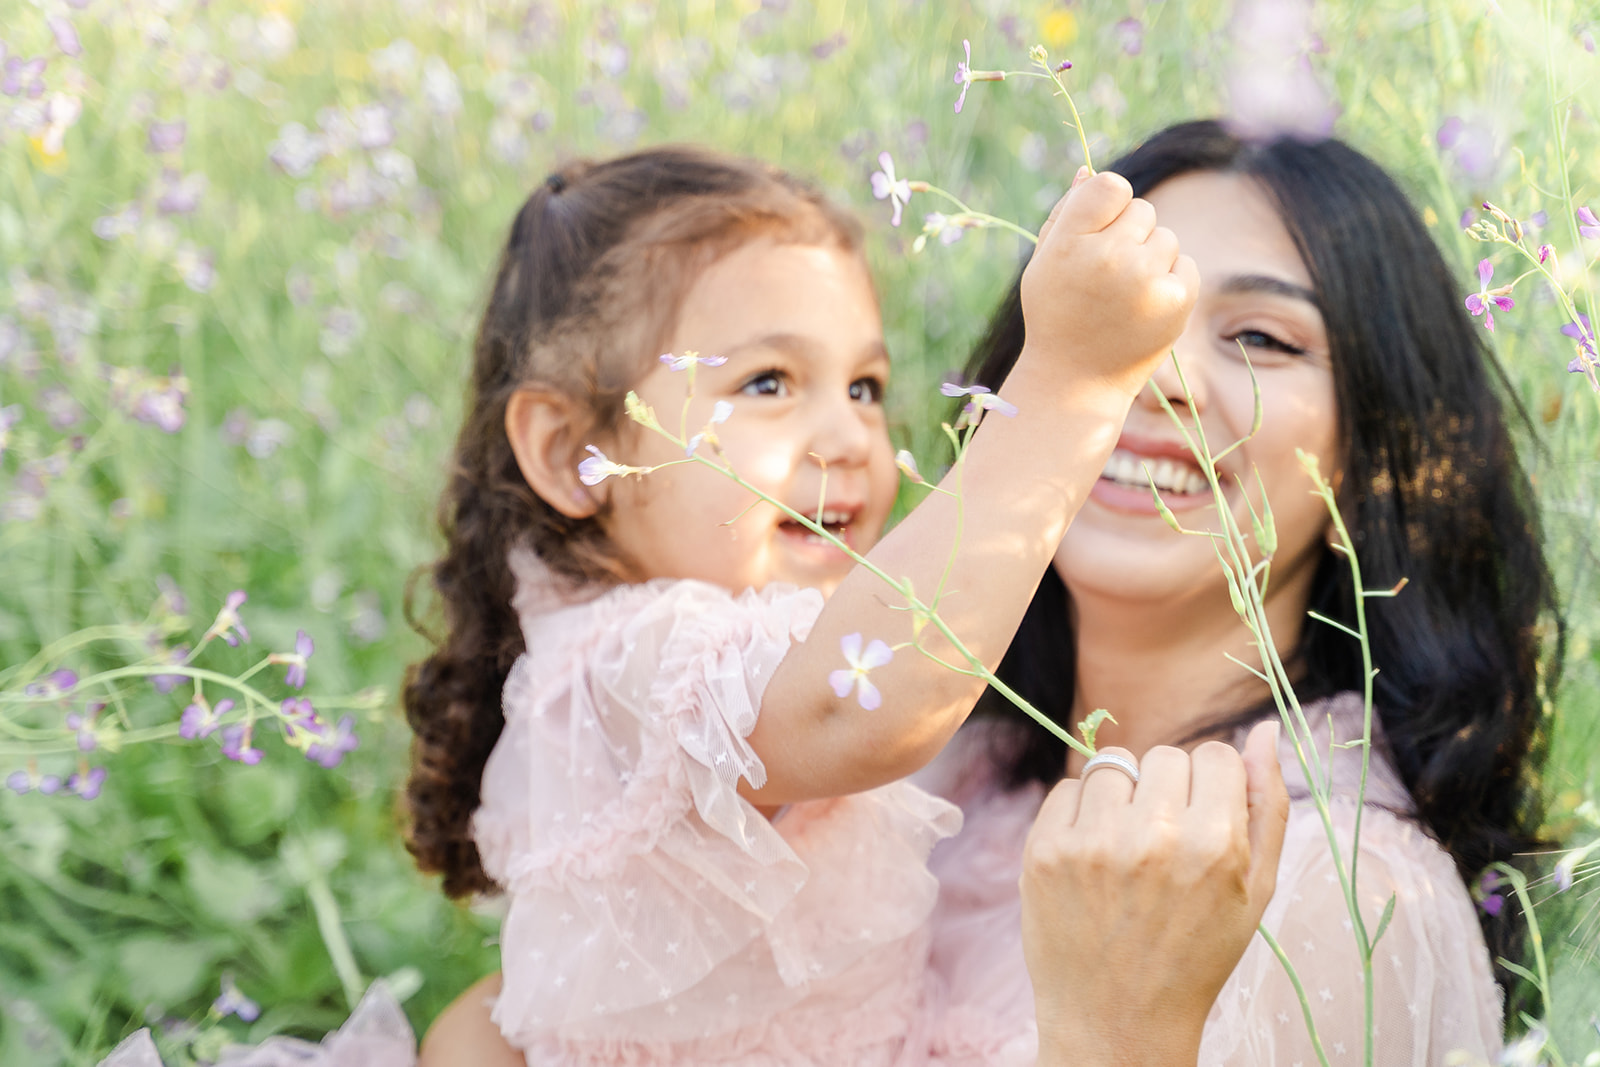 A mother and daughter in matching pink dress play with flowers while sitting in a field of wildflowers